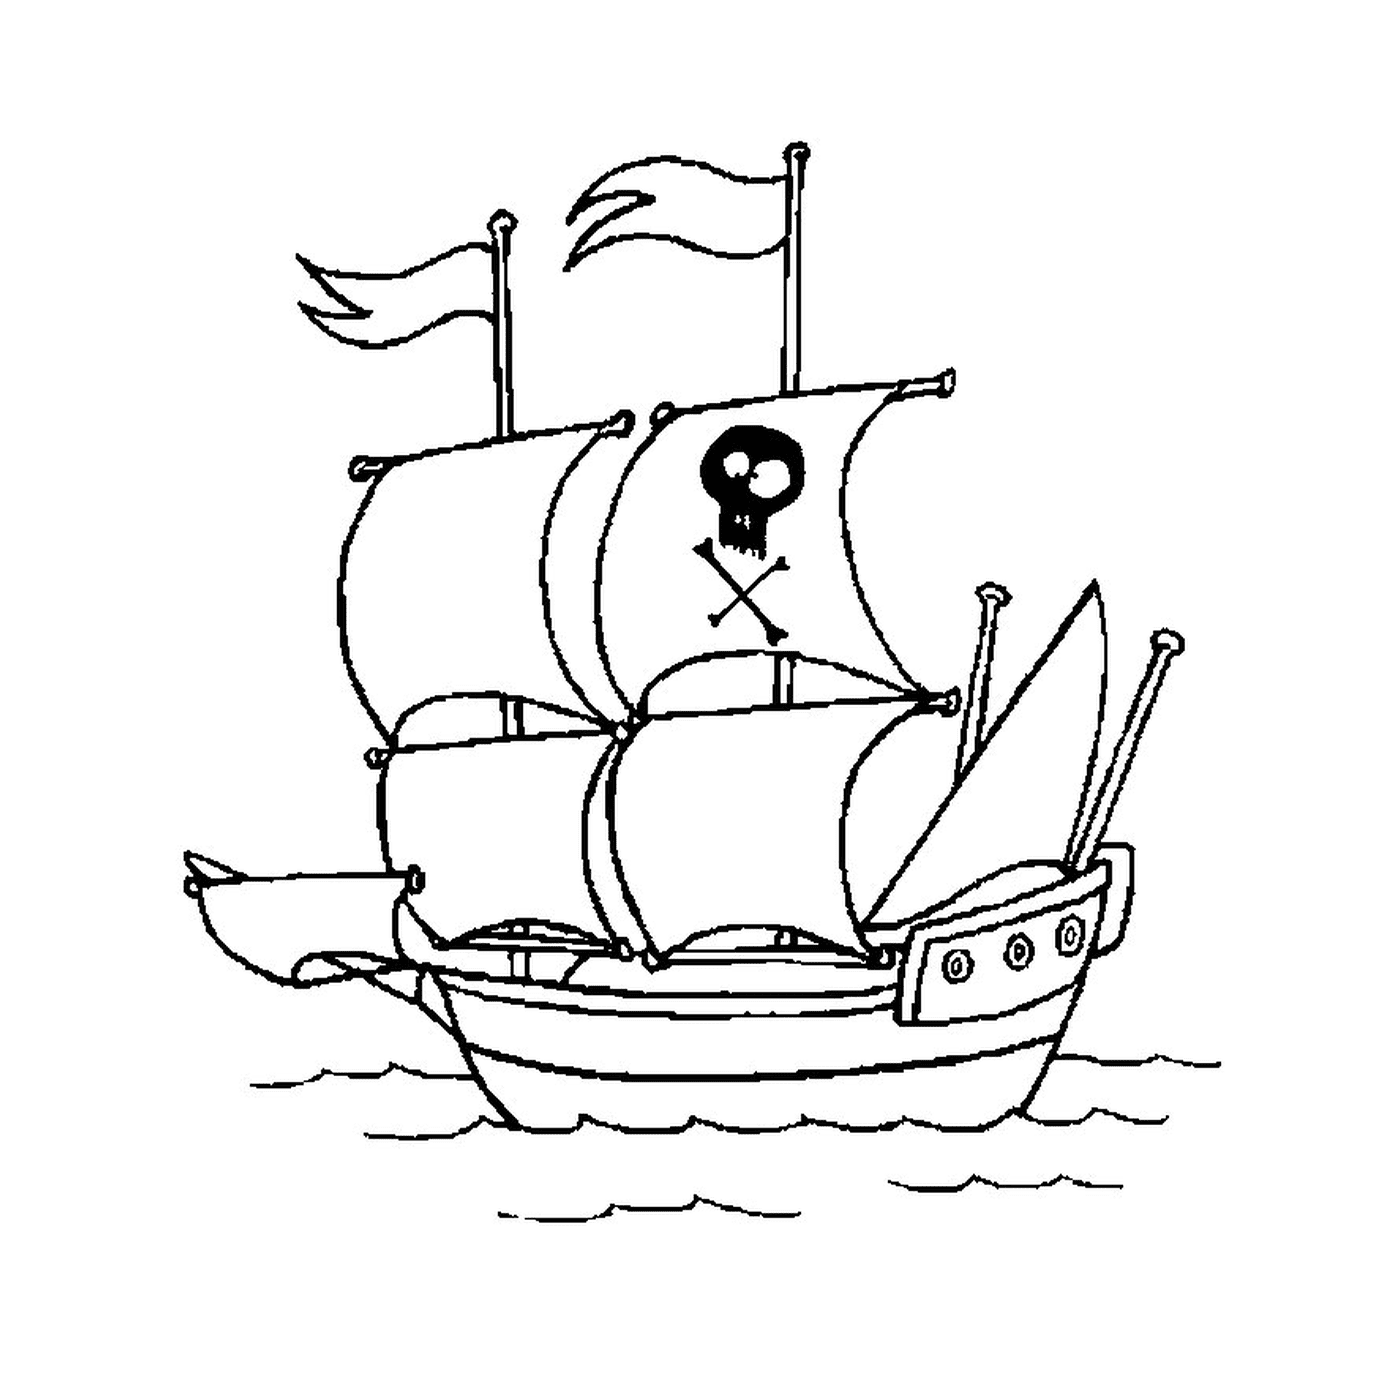  A pirate boat with a head of death 